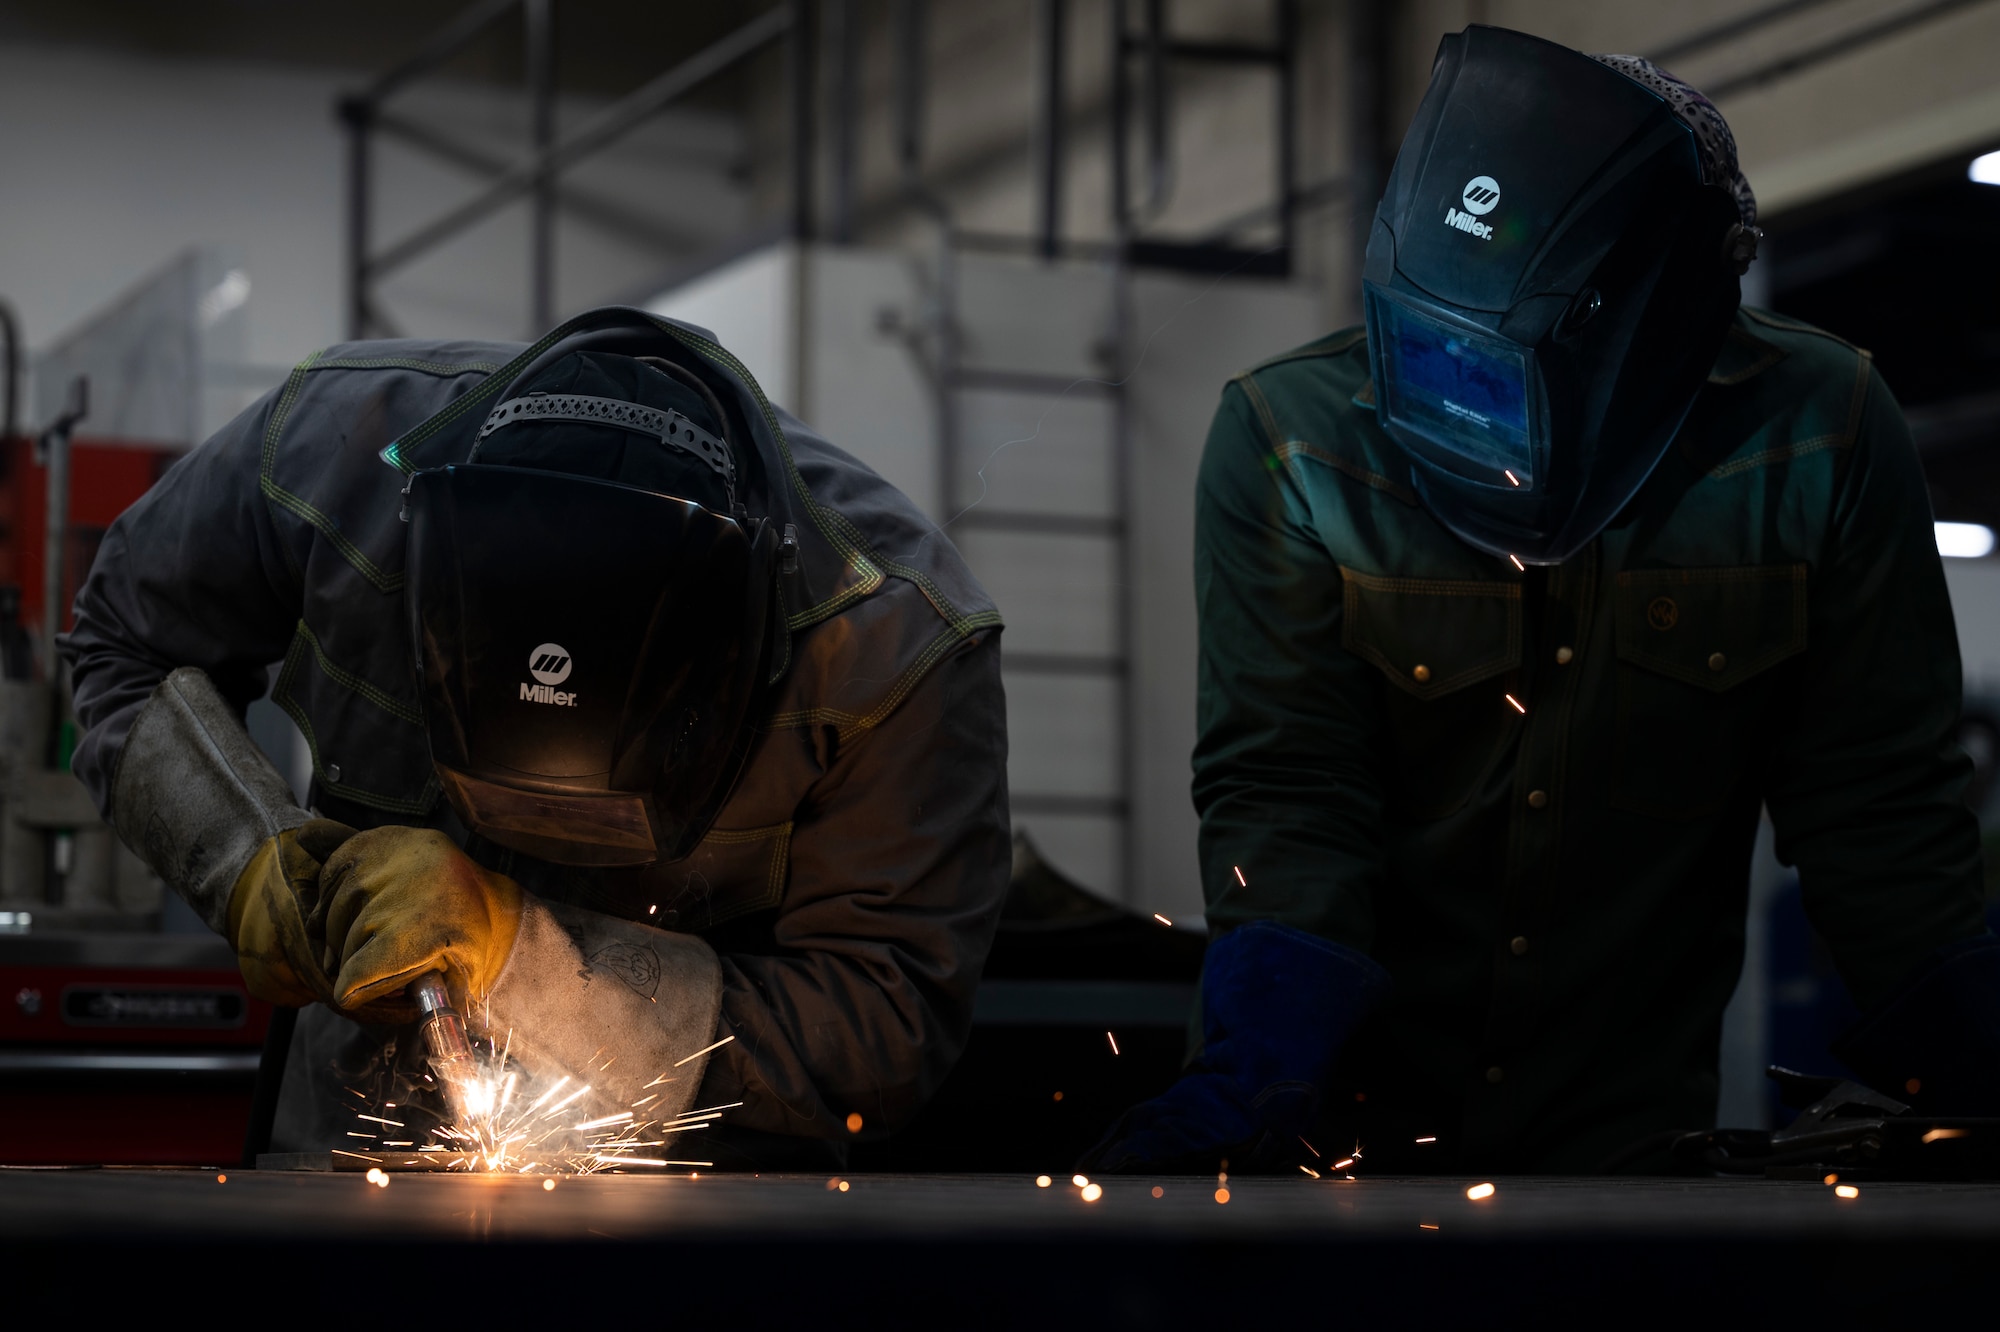 Sparks fly from a metallic inert gas welder as an Airman welds two metal sheets together.